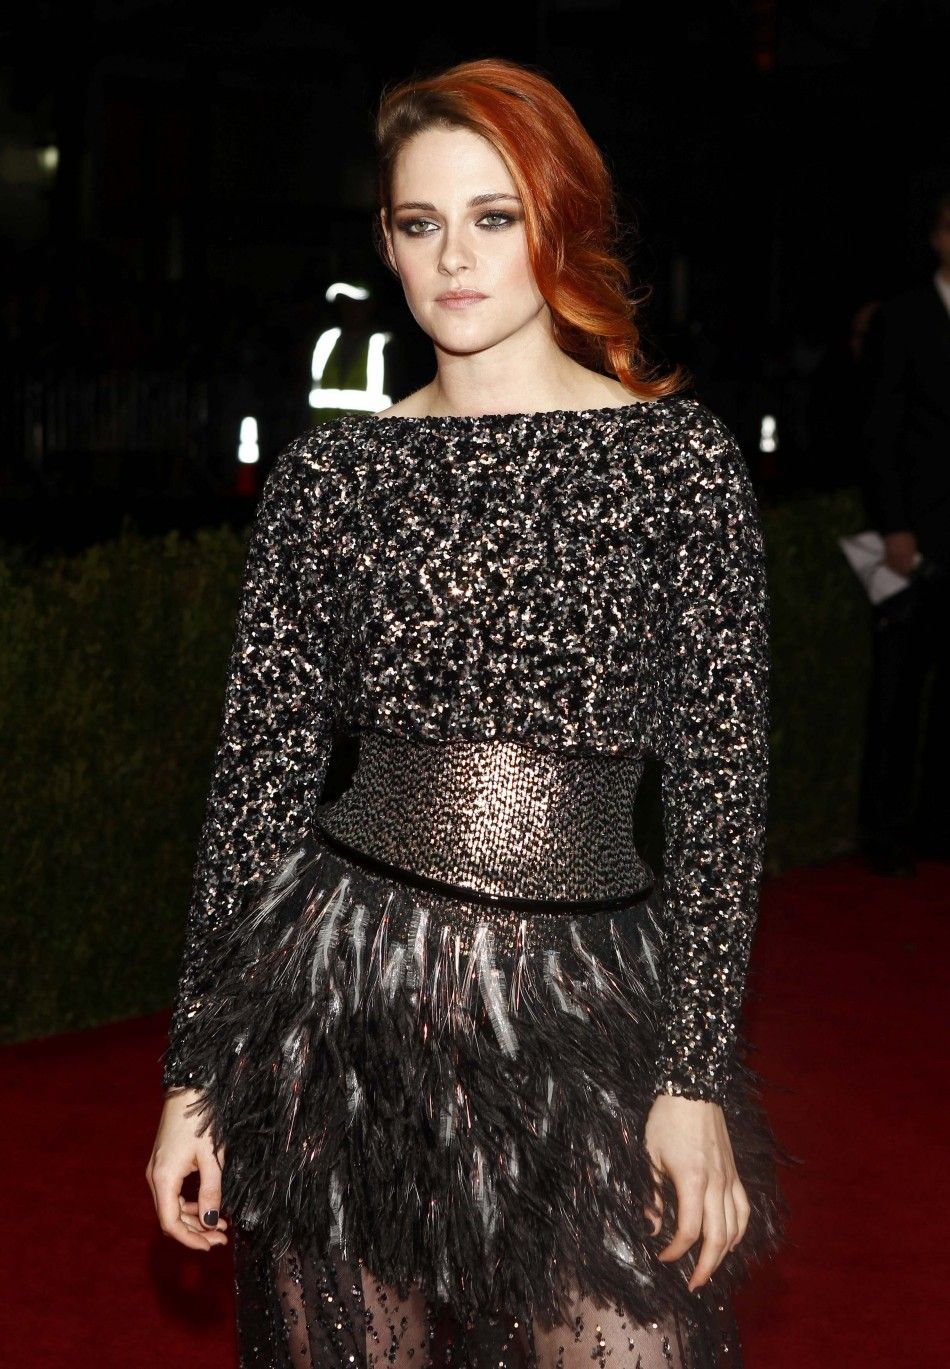 Actress Kristen Stewart arrives at the Metropolitan Museum of Art Costume Institute Gala Benefit celebrating the opening of quotCharles James Beyond Fashionquot in Upper Manhattan, New York May 5, 2014. REUTERSCarlo Allegri  